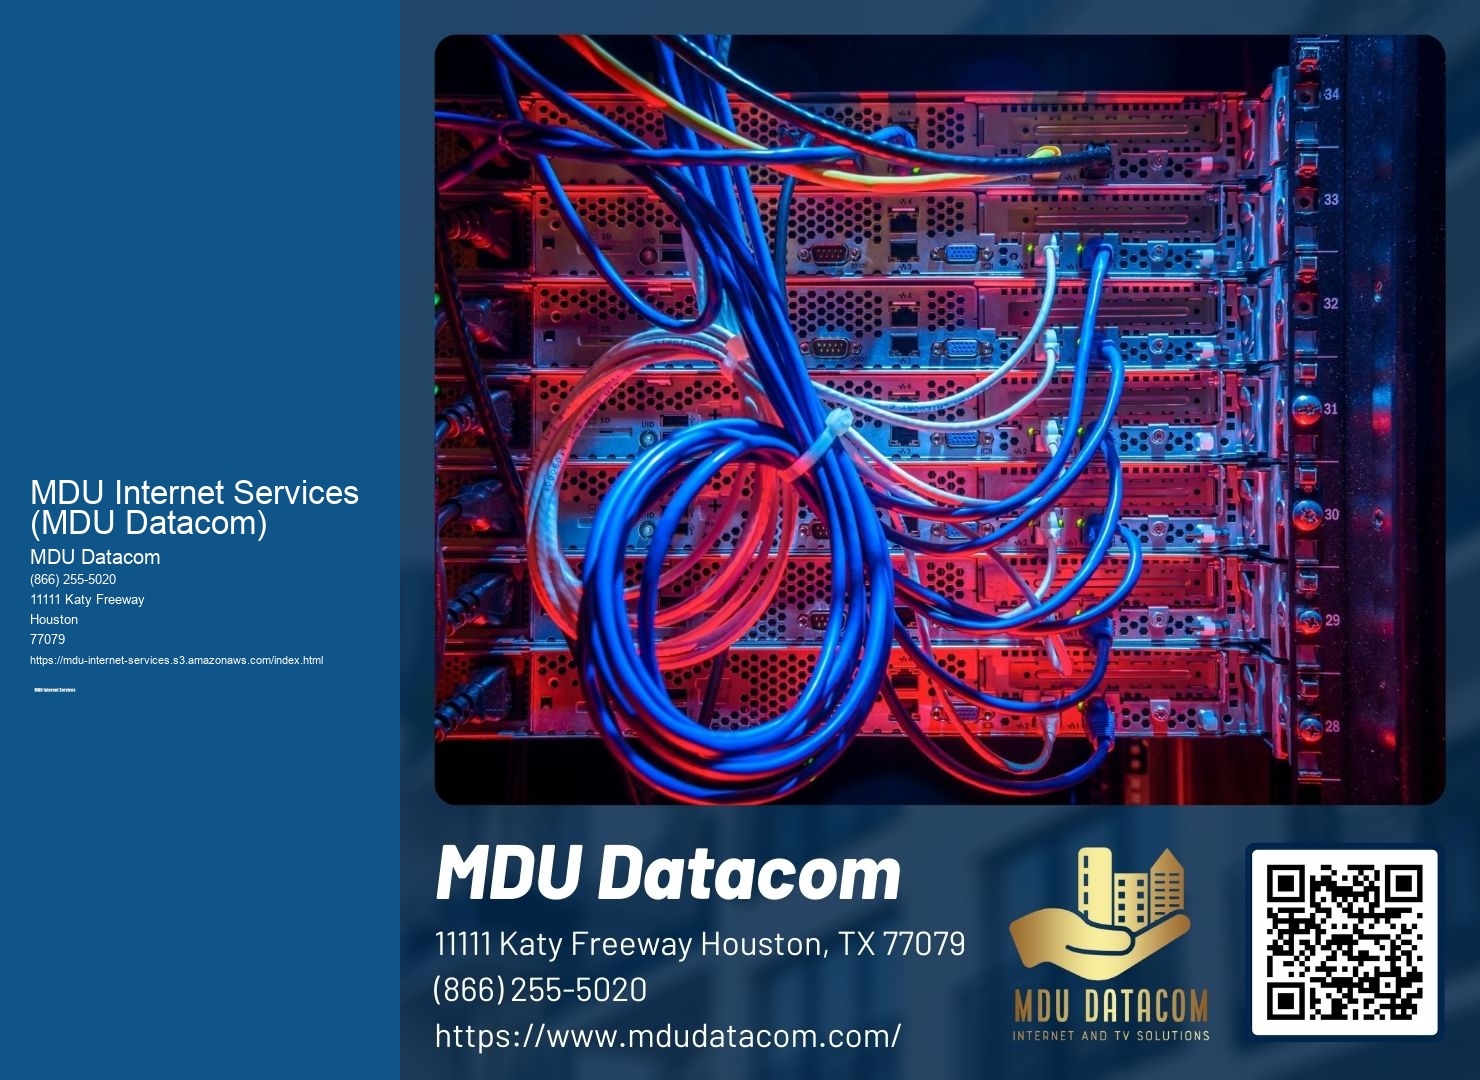 Are there any data caps or limitations on the usage of MDU internet services?